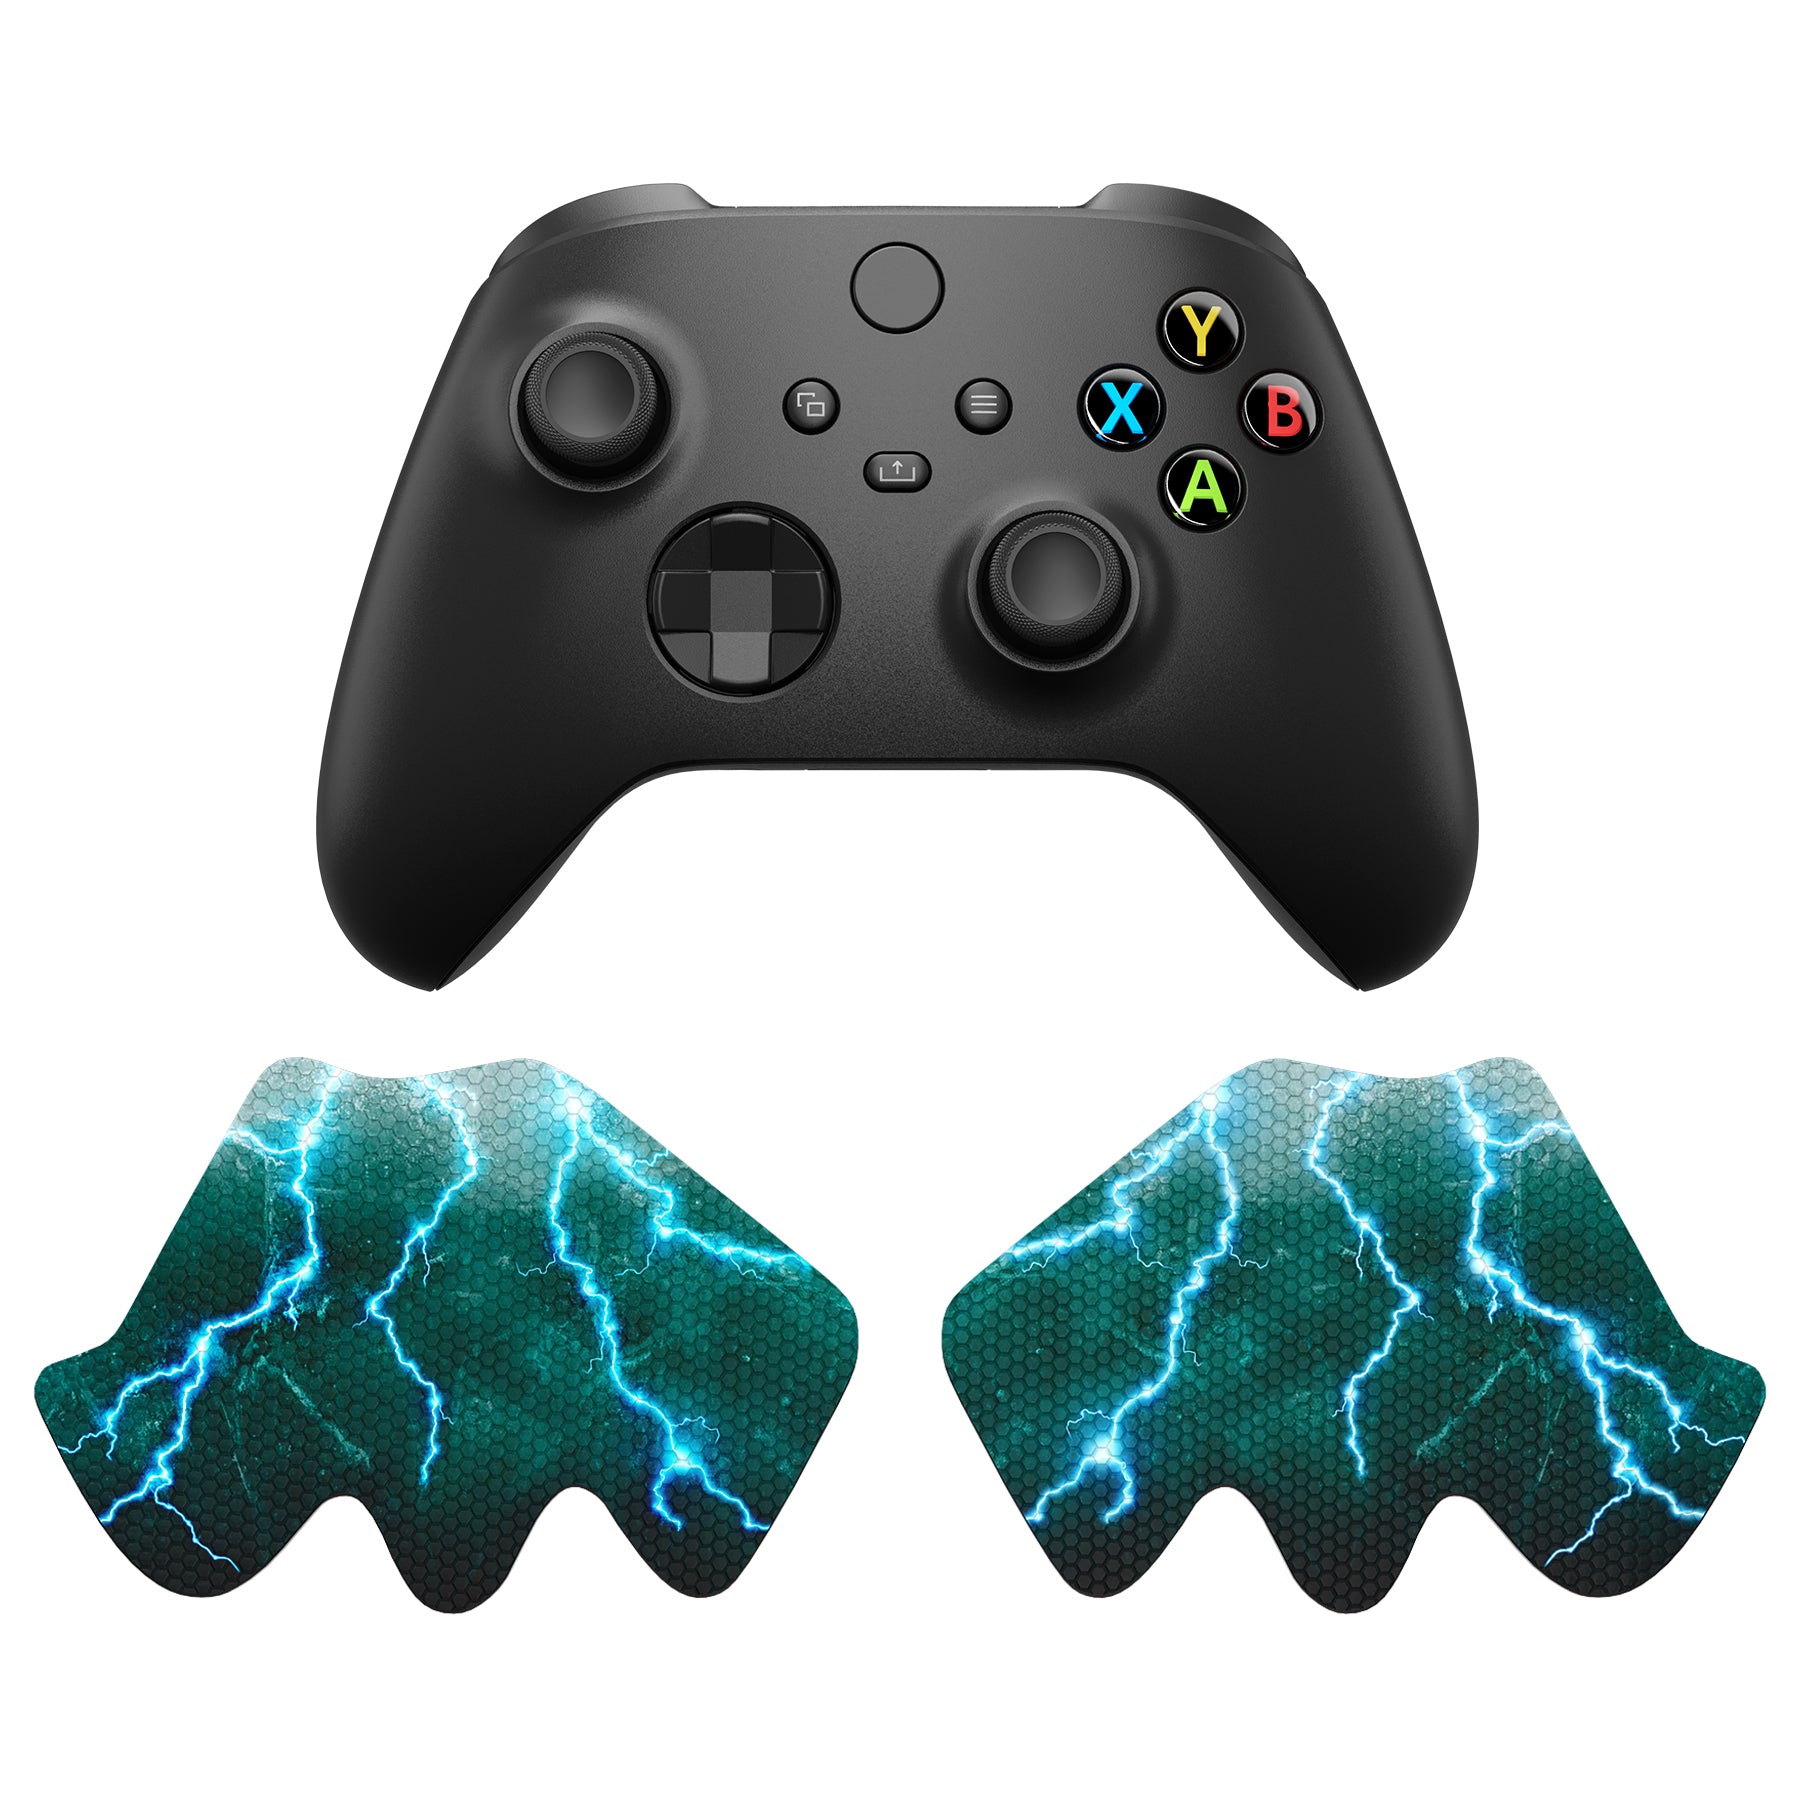 PlayVital Anti-Skid Sweat-Absorbent Controller Grip for Xbox Series X/S Controller, Professional Textured Soft Rubber Pads Handle Grips for Xbox Core Wireless Controller - Green Storm Thunder - X3PJ047 PlayVital